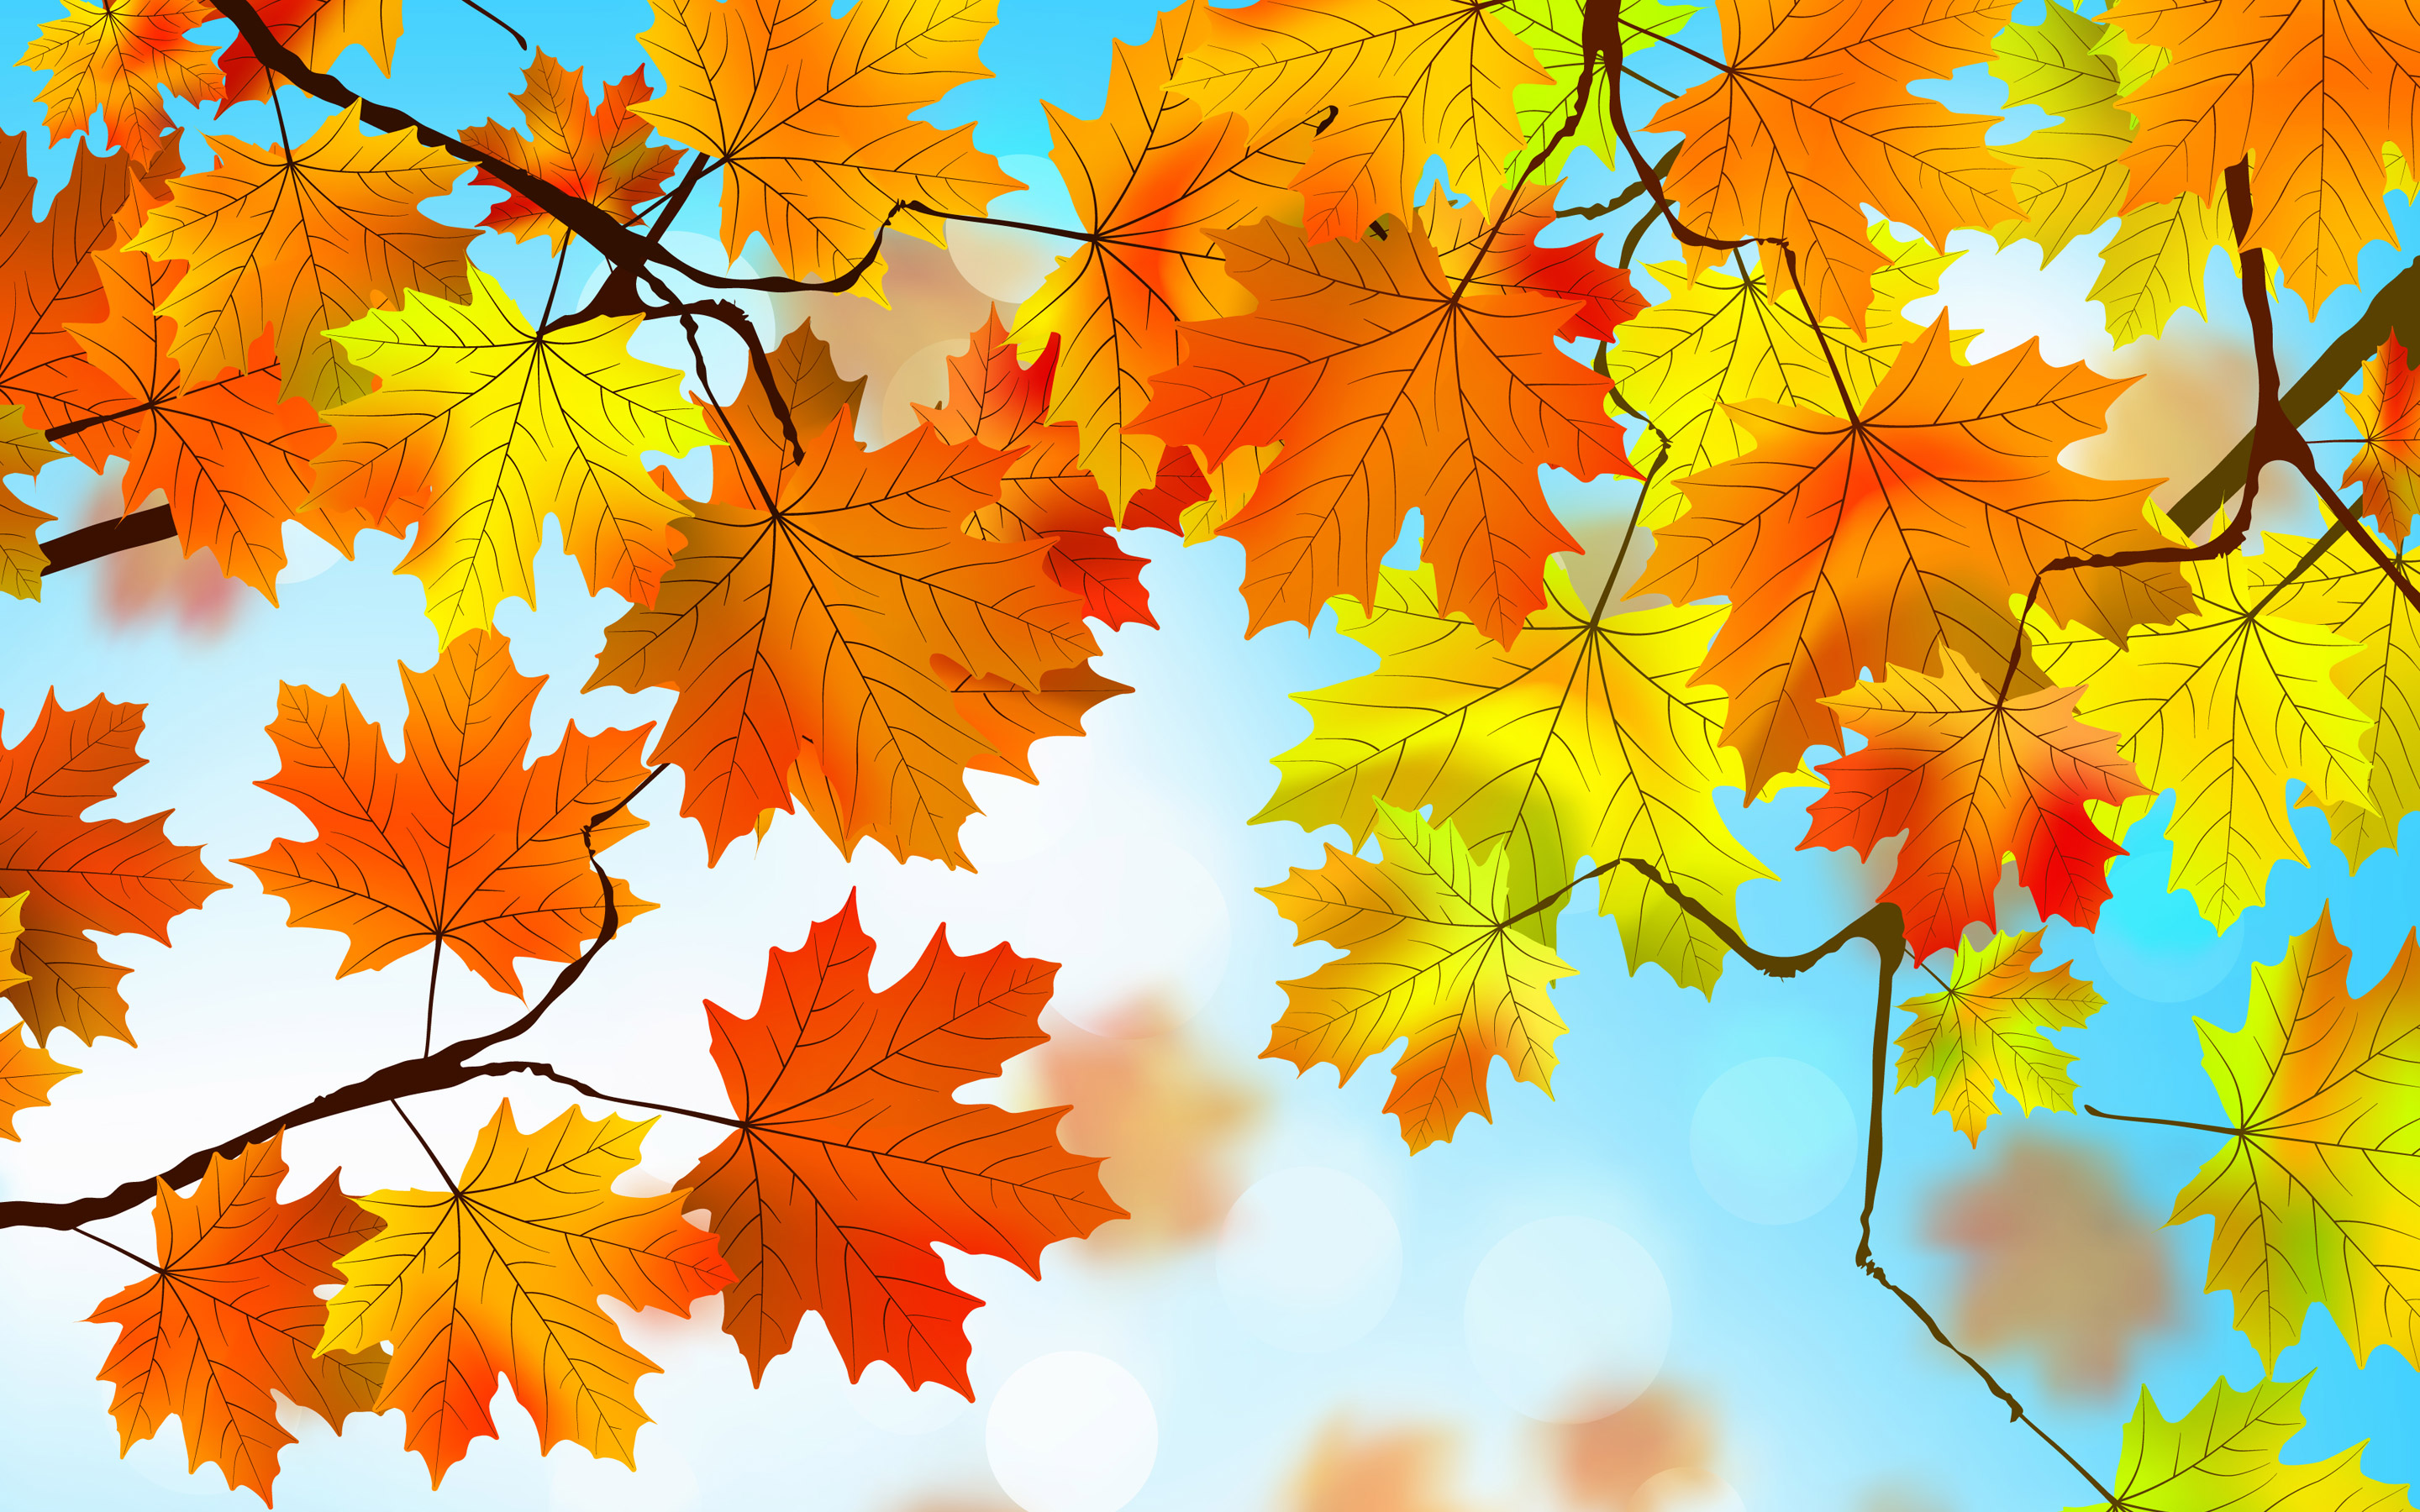 Autumn Leaves Hd   Autumn Leaves Hd Wallpapers backgrounds